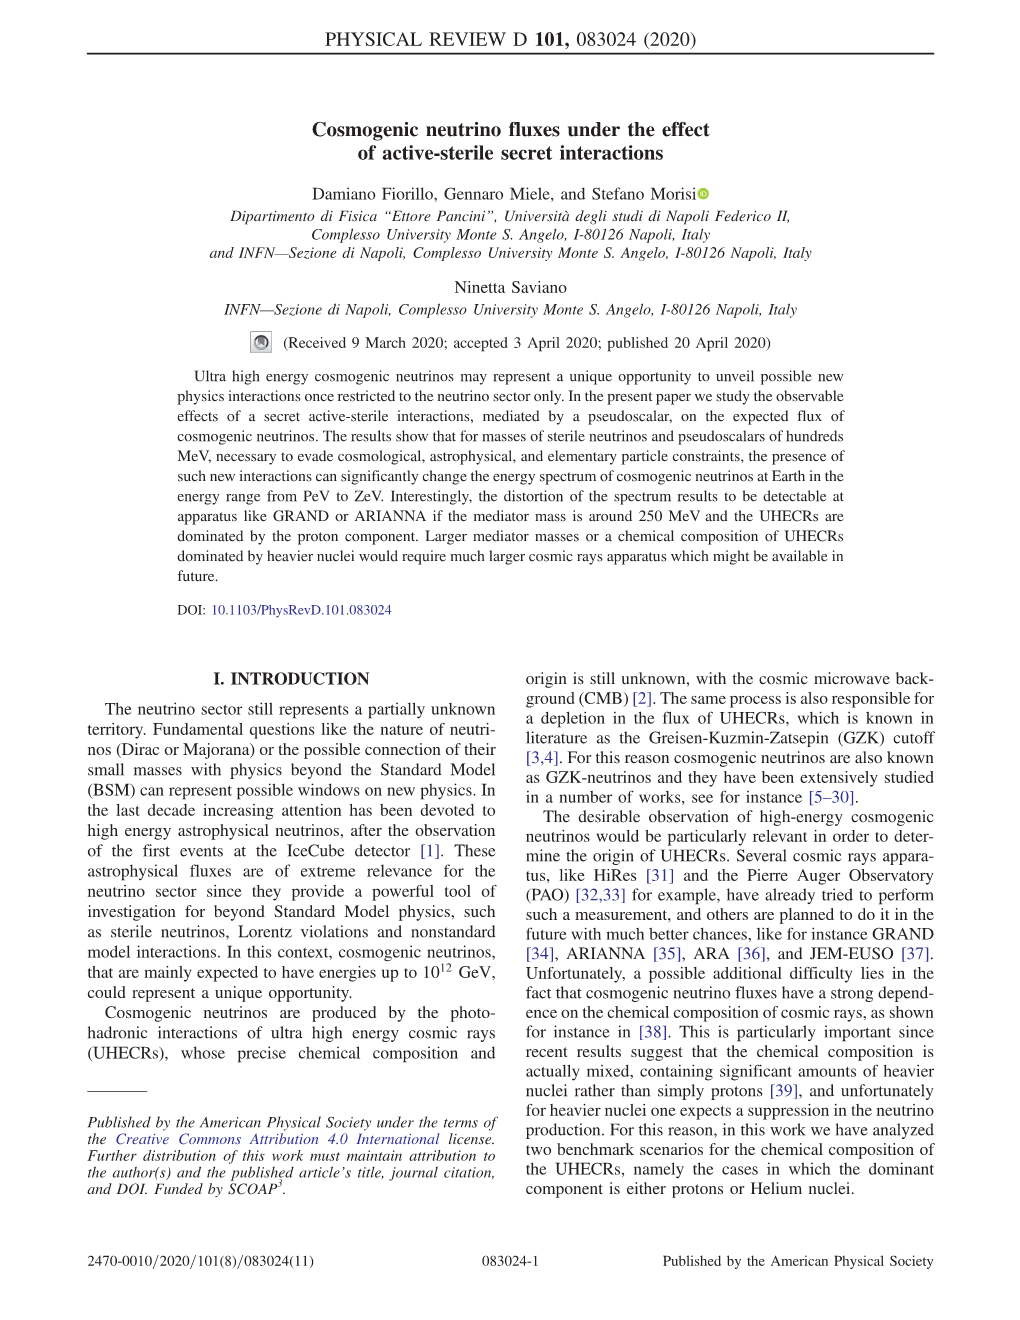 Cosmogenic Neutrino Fluxes Under the Effect of Active-Sterile Secret Interactions